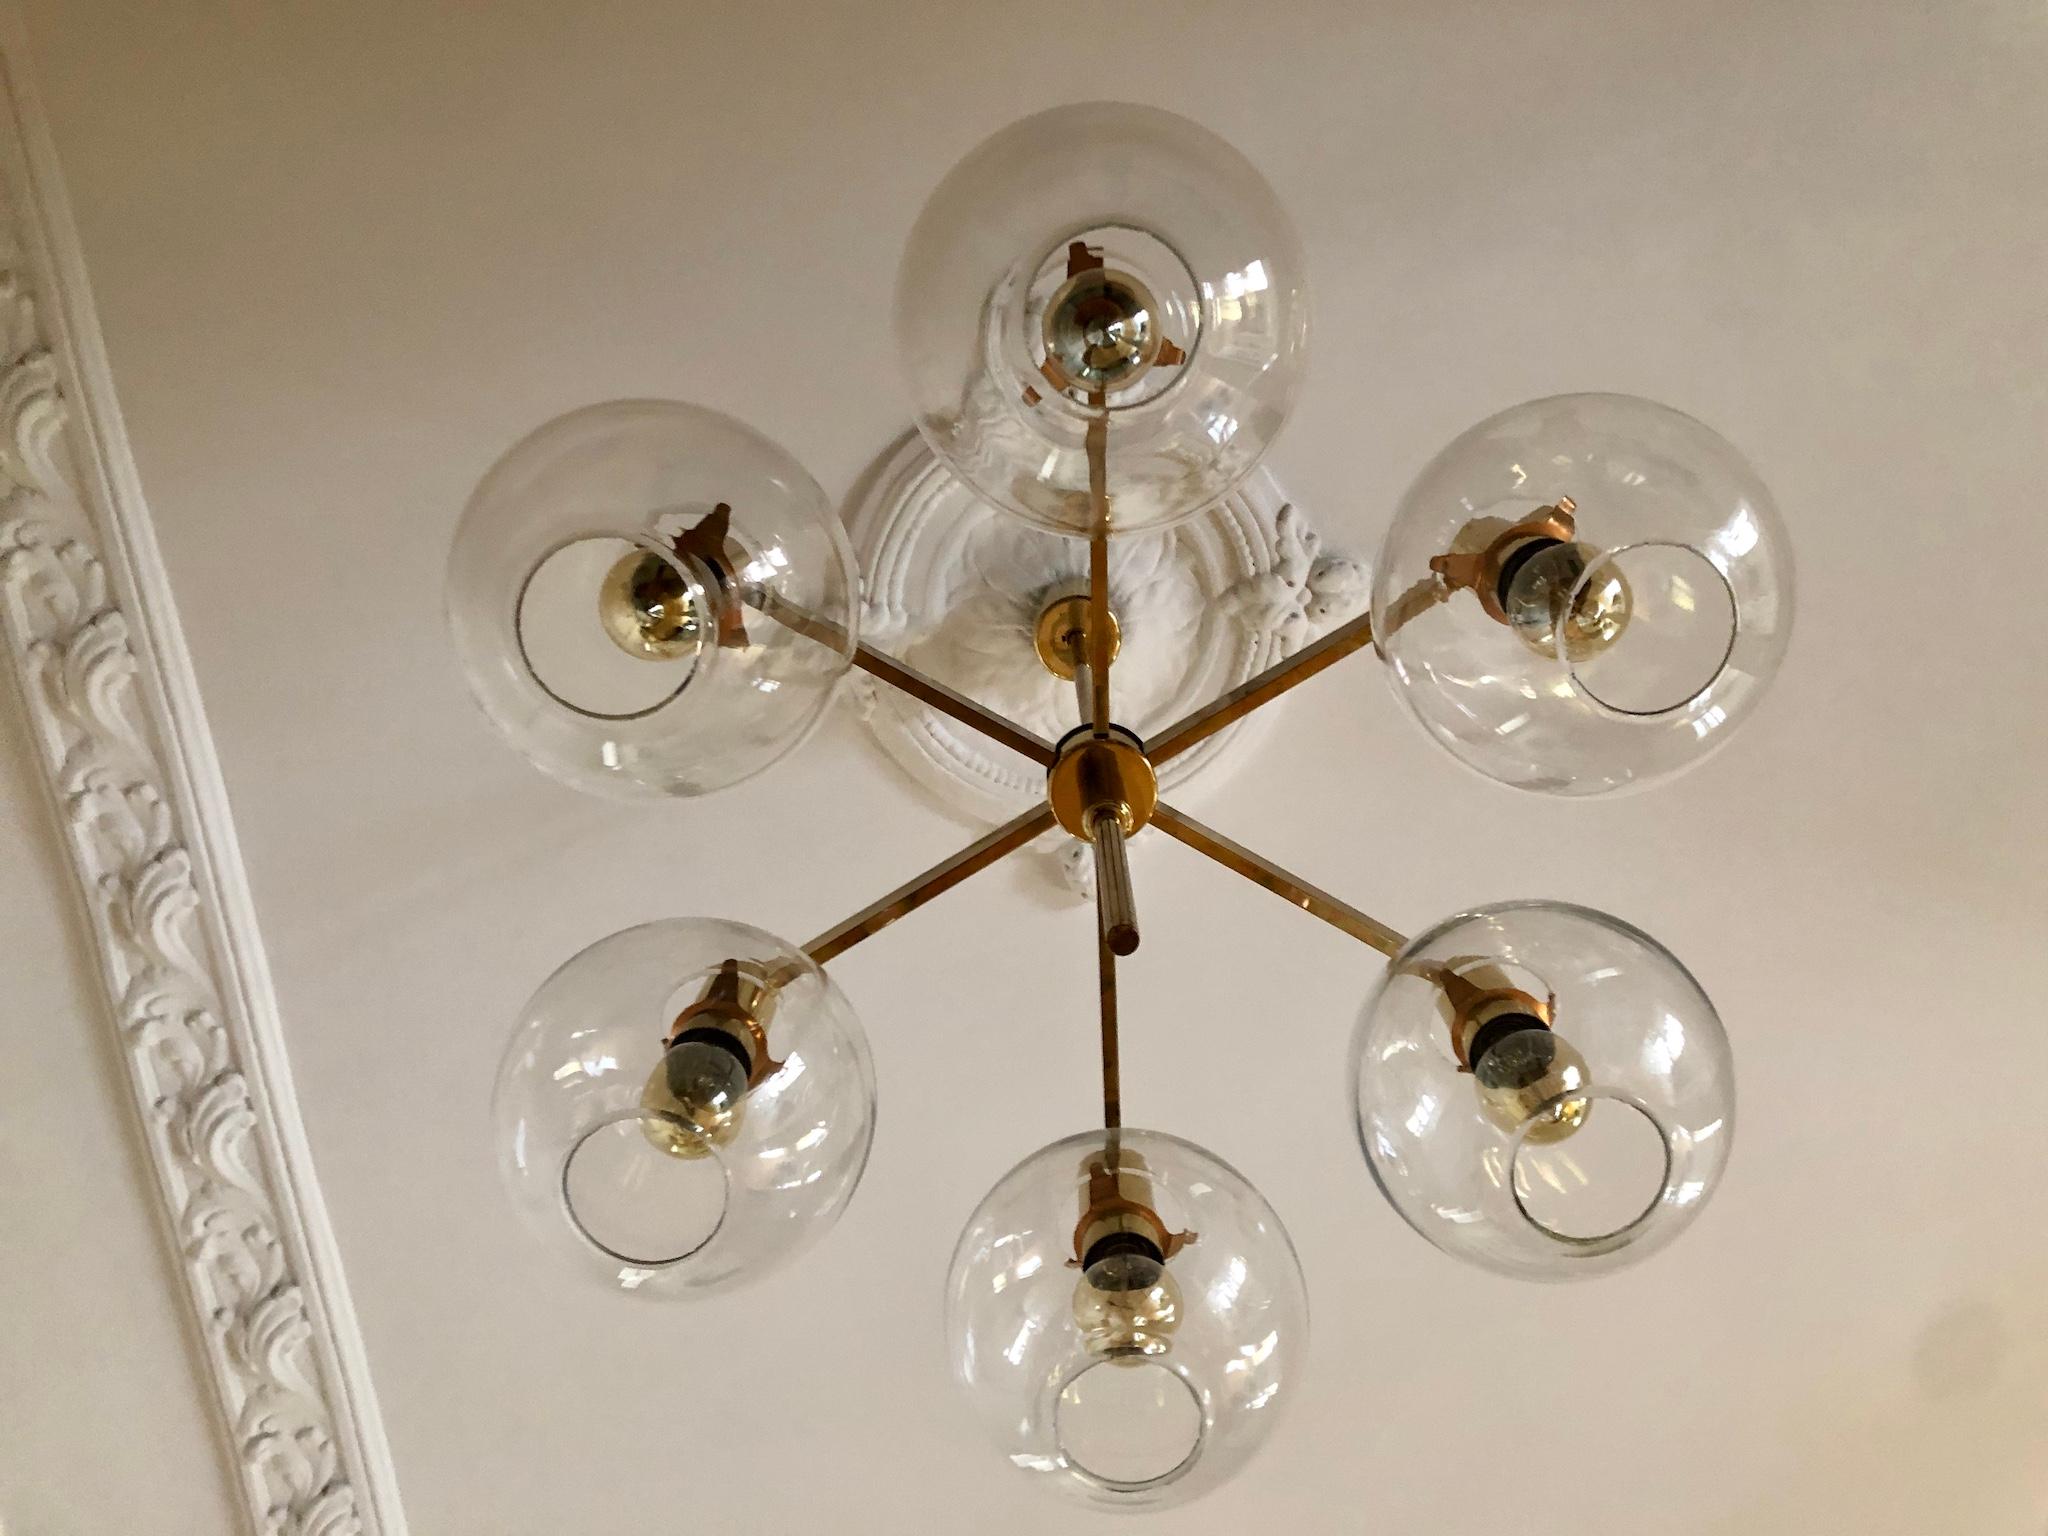 Swedish Brass Chandelier with Six Light Globes by Hans-Agne Jakobsson